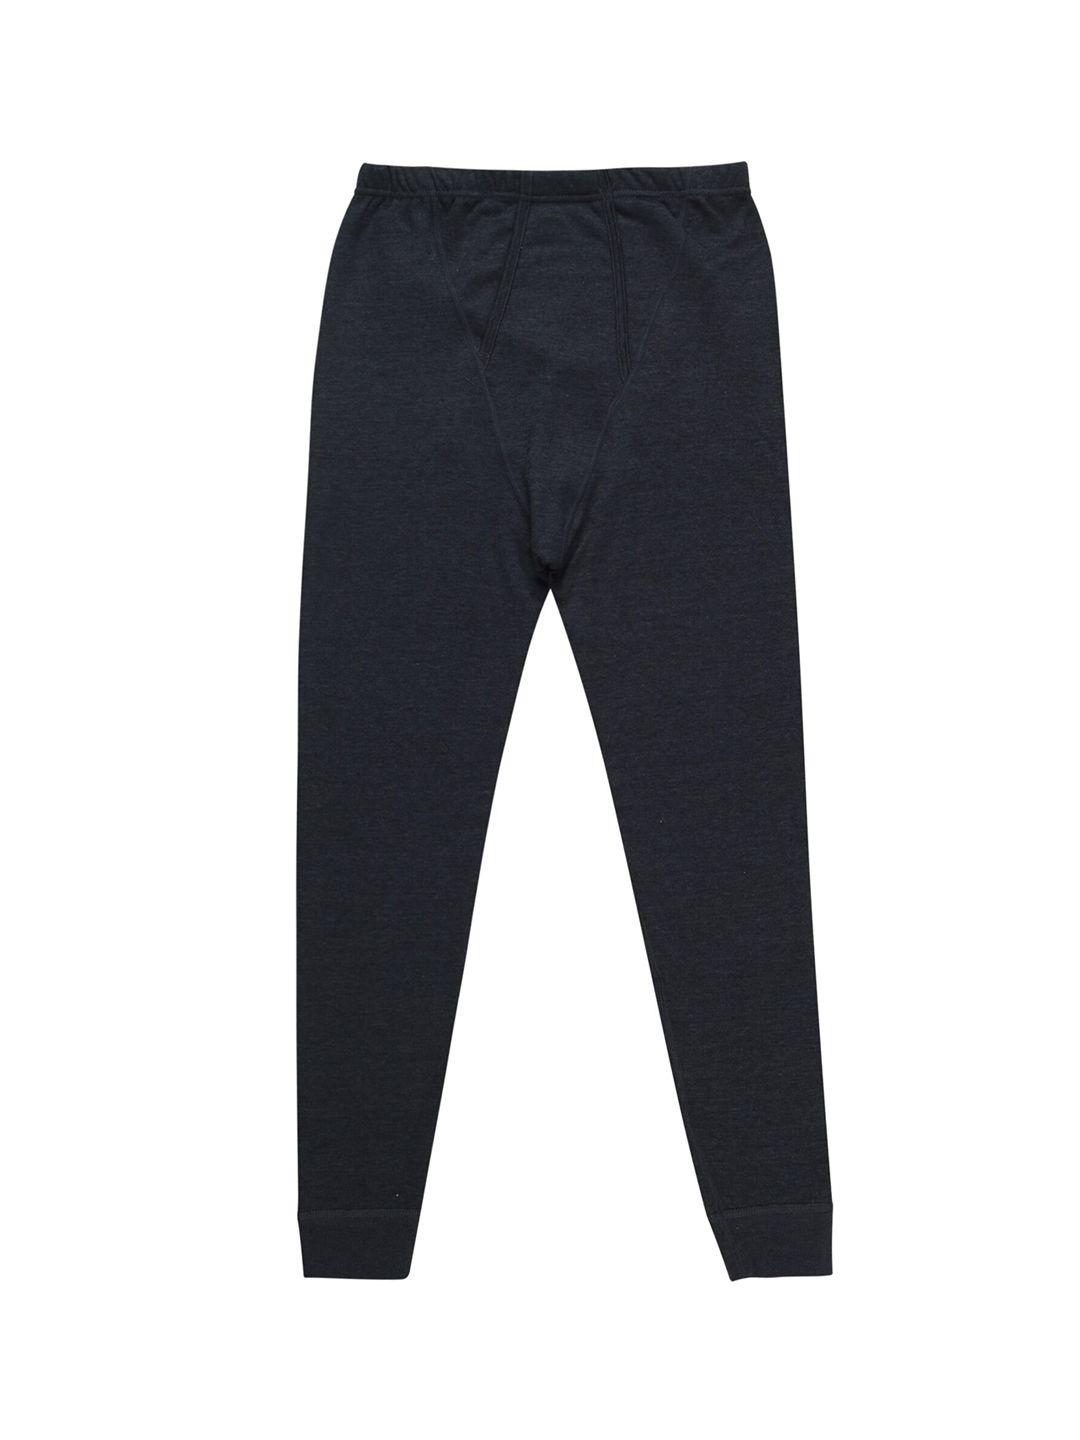 bodycare insider men navy blue solid cotton thermal bottoms